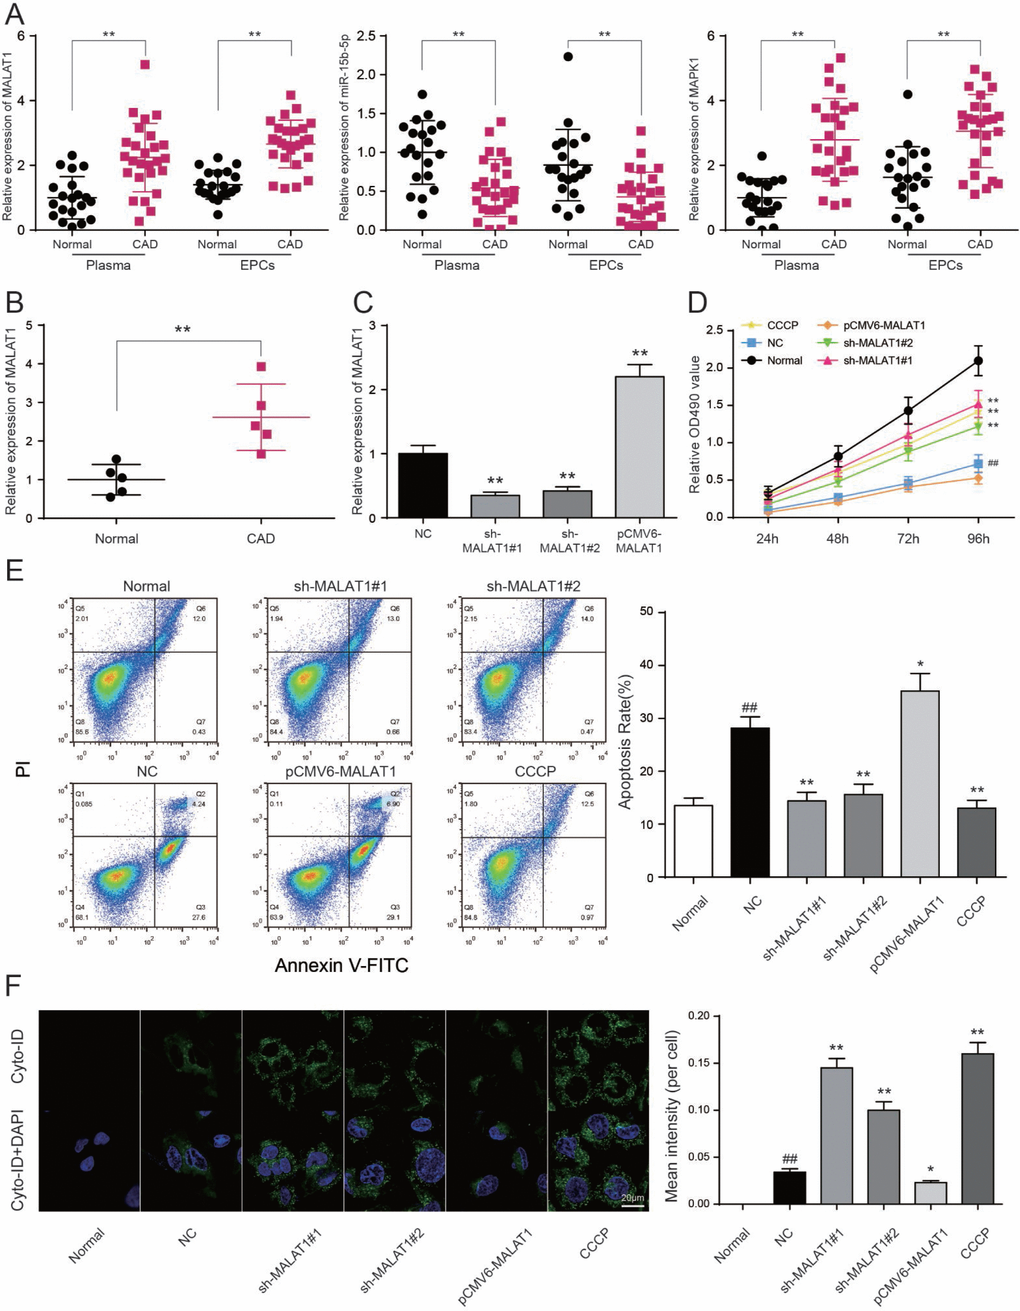 LncRNA MALAT1 inhibits cell autophagy and promotes CAD progression. (A) MALAT1 and MAPK1 were overexpressed in CAD blood samples and EPCs while miR-15b-5p was down-regulated in CAD blood samples and EPCs. **PB) MALAT1 expression in 5 CAD EPC samples was higher than that in 5 healthy EPC samples. **PC) MALAT1 was depressed in EPCs transfected with sh-MALAT1#1 or sh-MALAT1#2 detected by qRT-PCR. **PD) MTT results showed that cell viability was promoted in EPCs transfected with sh-MALAT1#1 or sh-MALAT1#2. **PPE) FCM results revealed that sh-MALAT1#1 or sh-MALAT1#2 restrained cell apoptosis rate of EPCs and there was significant difference between normal group and NC group. *PPPF) Autophagy assay results revealed that sh-MALAT1#1, sh-MALAT1#2 and CCCP raised EPCs autophagy rate and there was conspicuous difference between normal group and NC group. *PPP